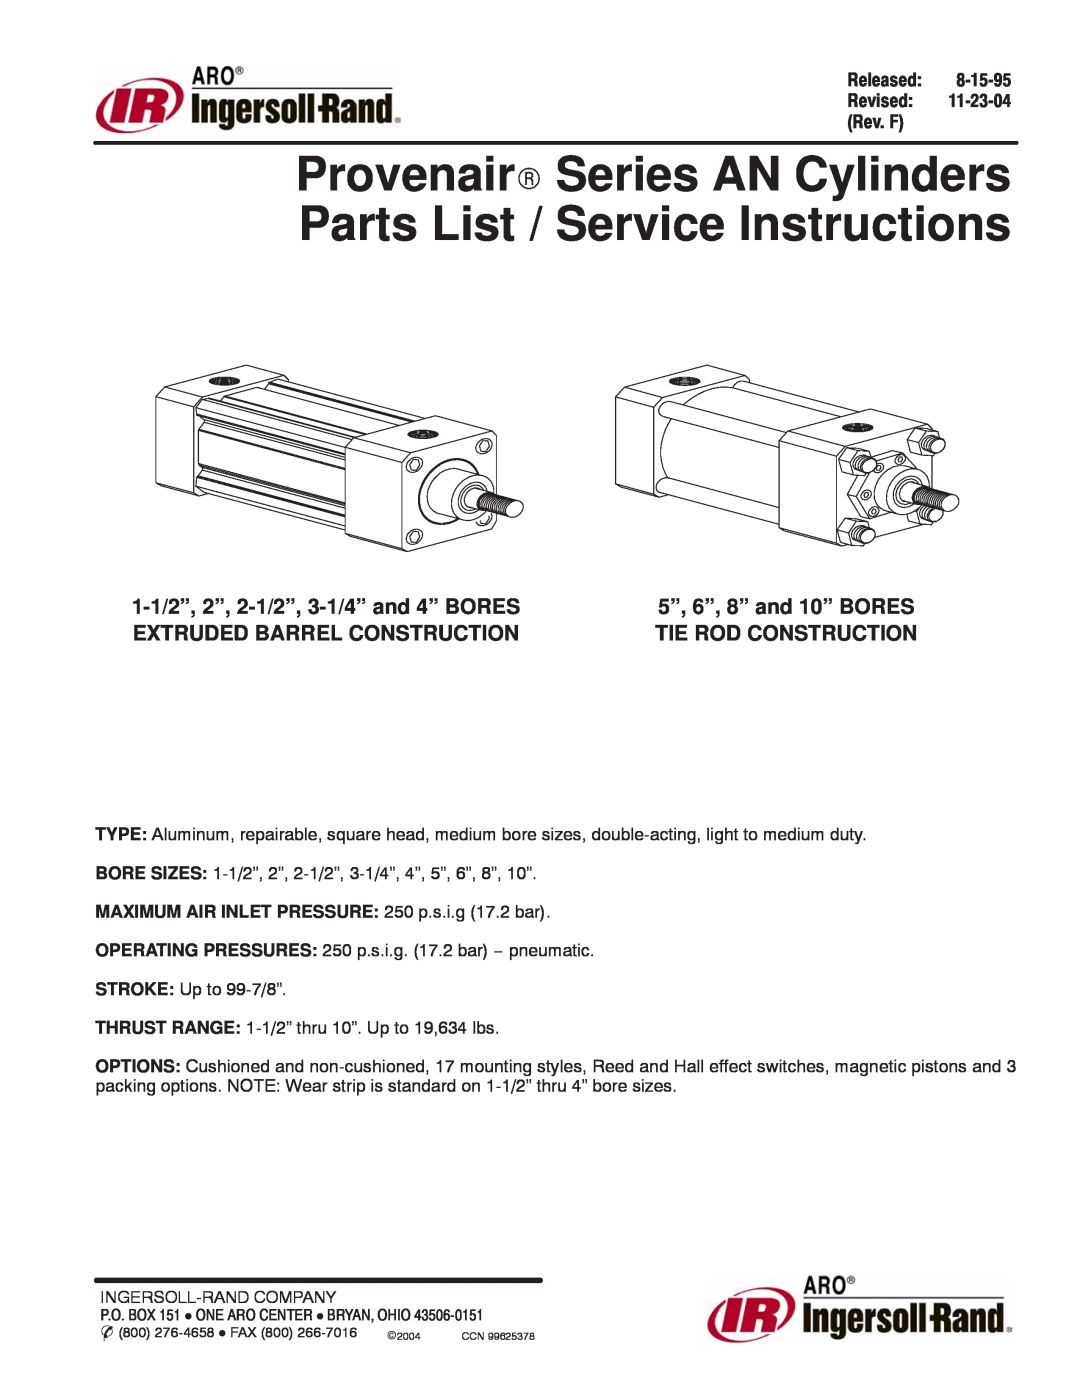 Ingersoll-Rand 6, 8 and 10 BORES, 5, 1/1/2002 manual 1-1/2”, 2”, 2-1/2”, 3-1/4” and 4” BORES EXTRUDED BARREL CONSTRUCTION 